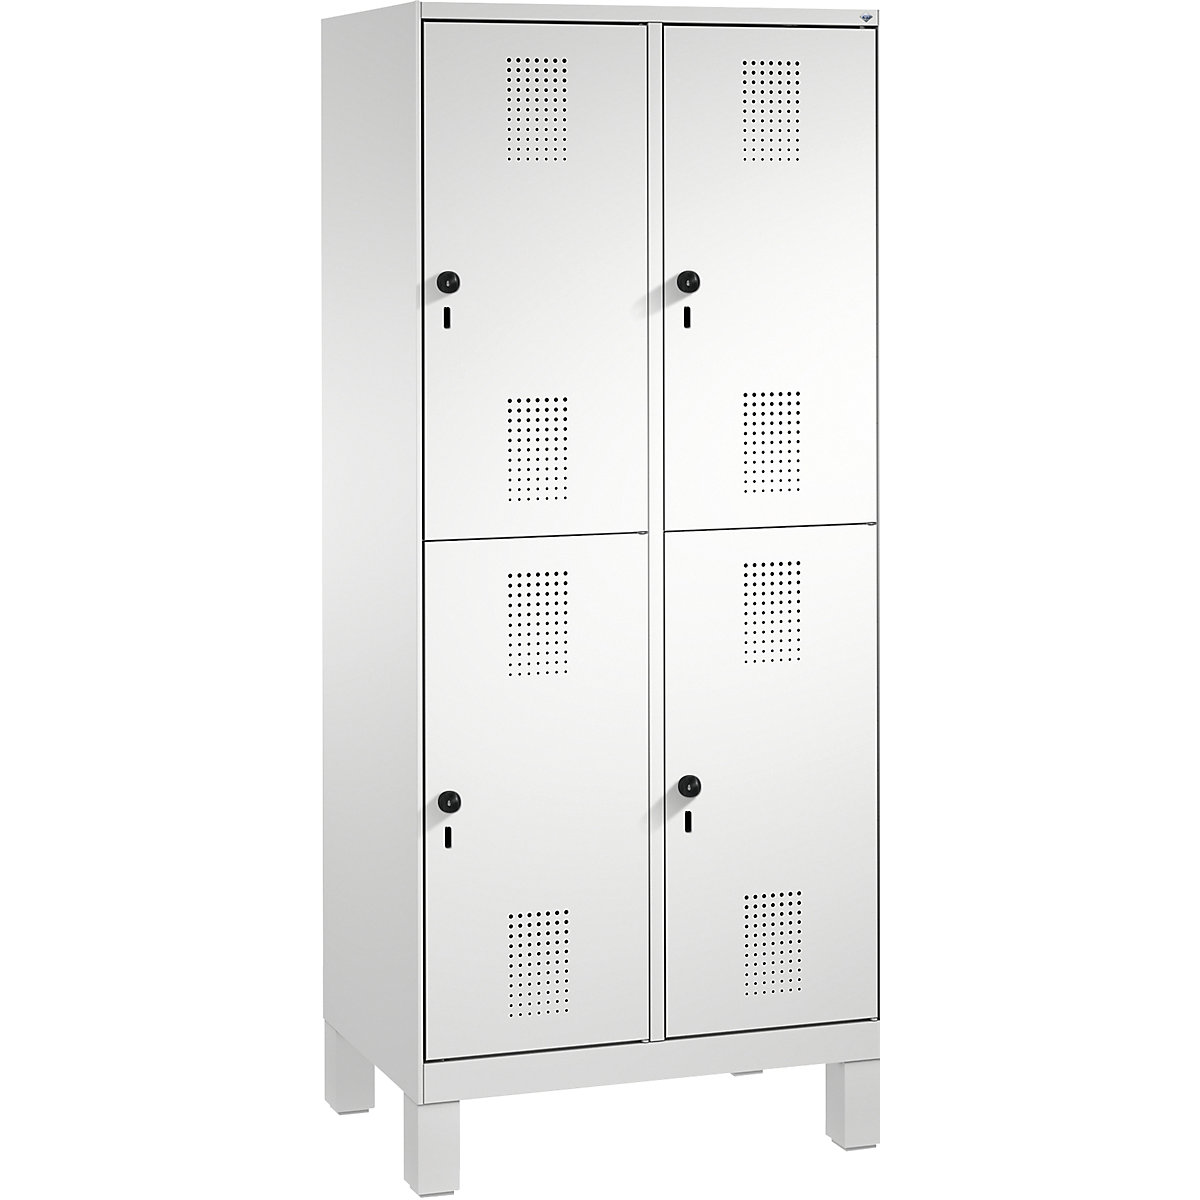 EVOLO cloakroom locker, double tier, with feet – C+P, 2 compartments, 2 shelf compartments each, compartment width 400 mm, light grey-10